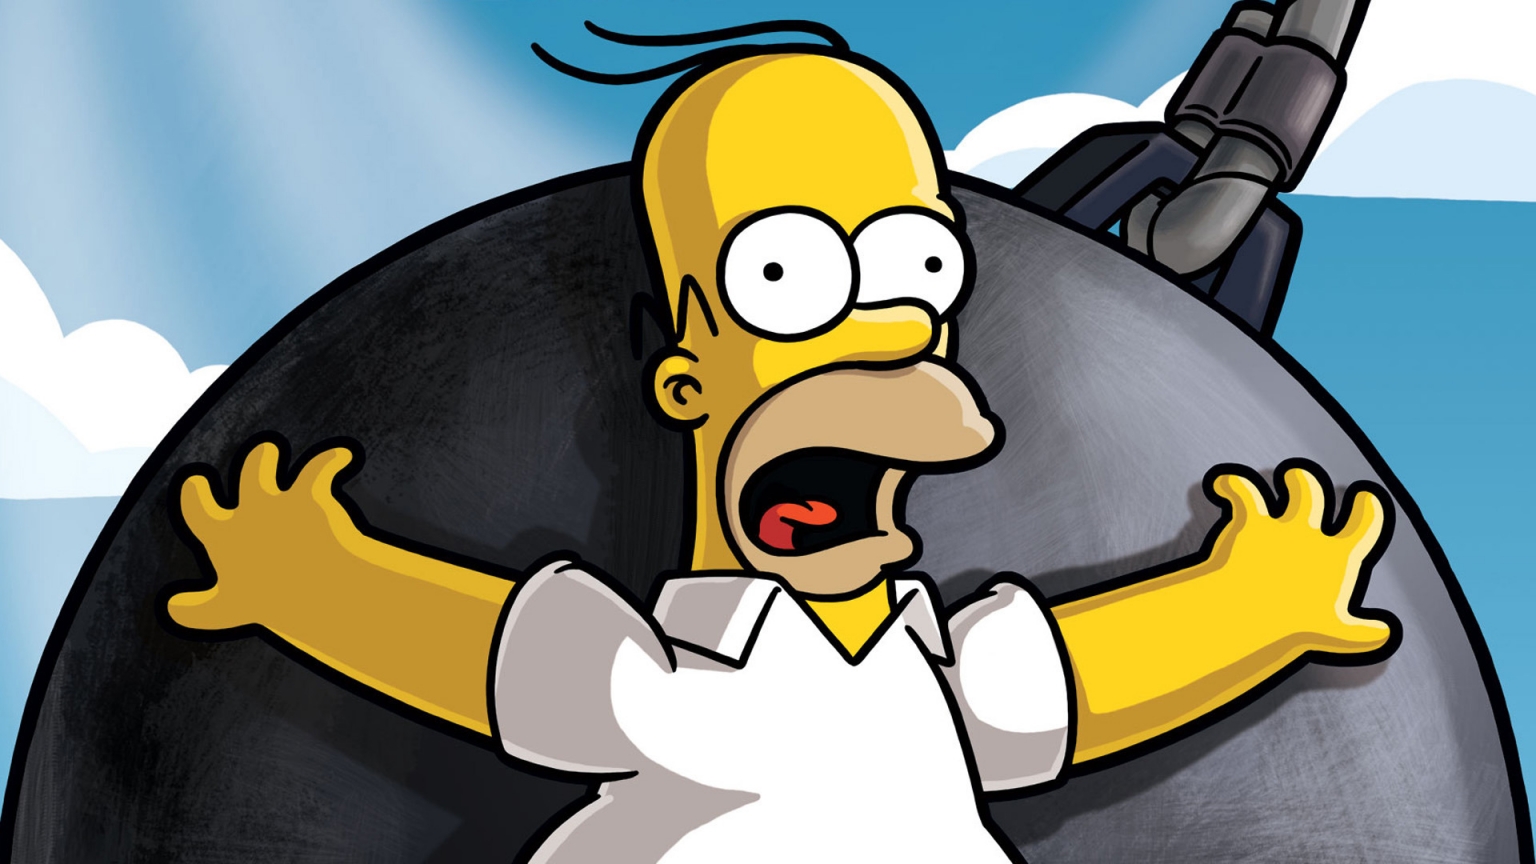 The Simpsons Show for 1536 x 864 HDTV resolution